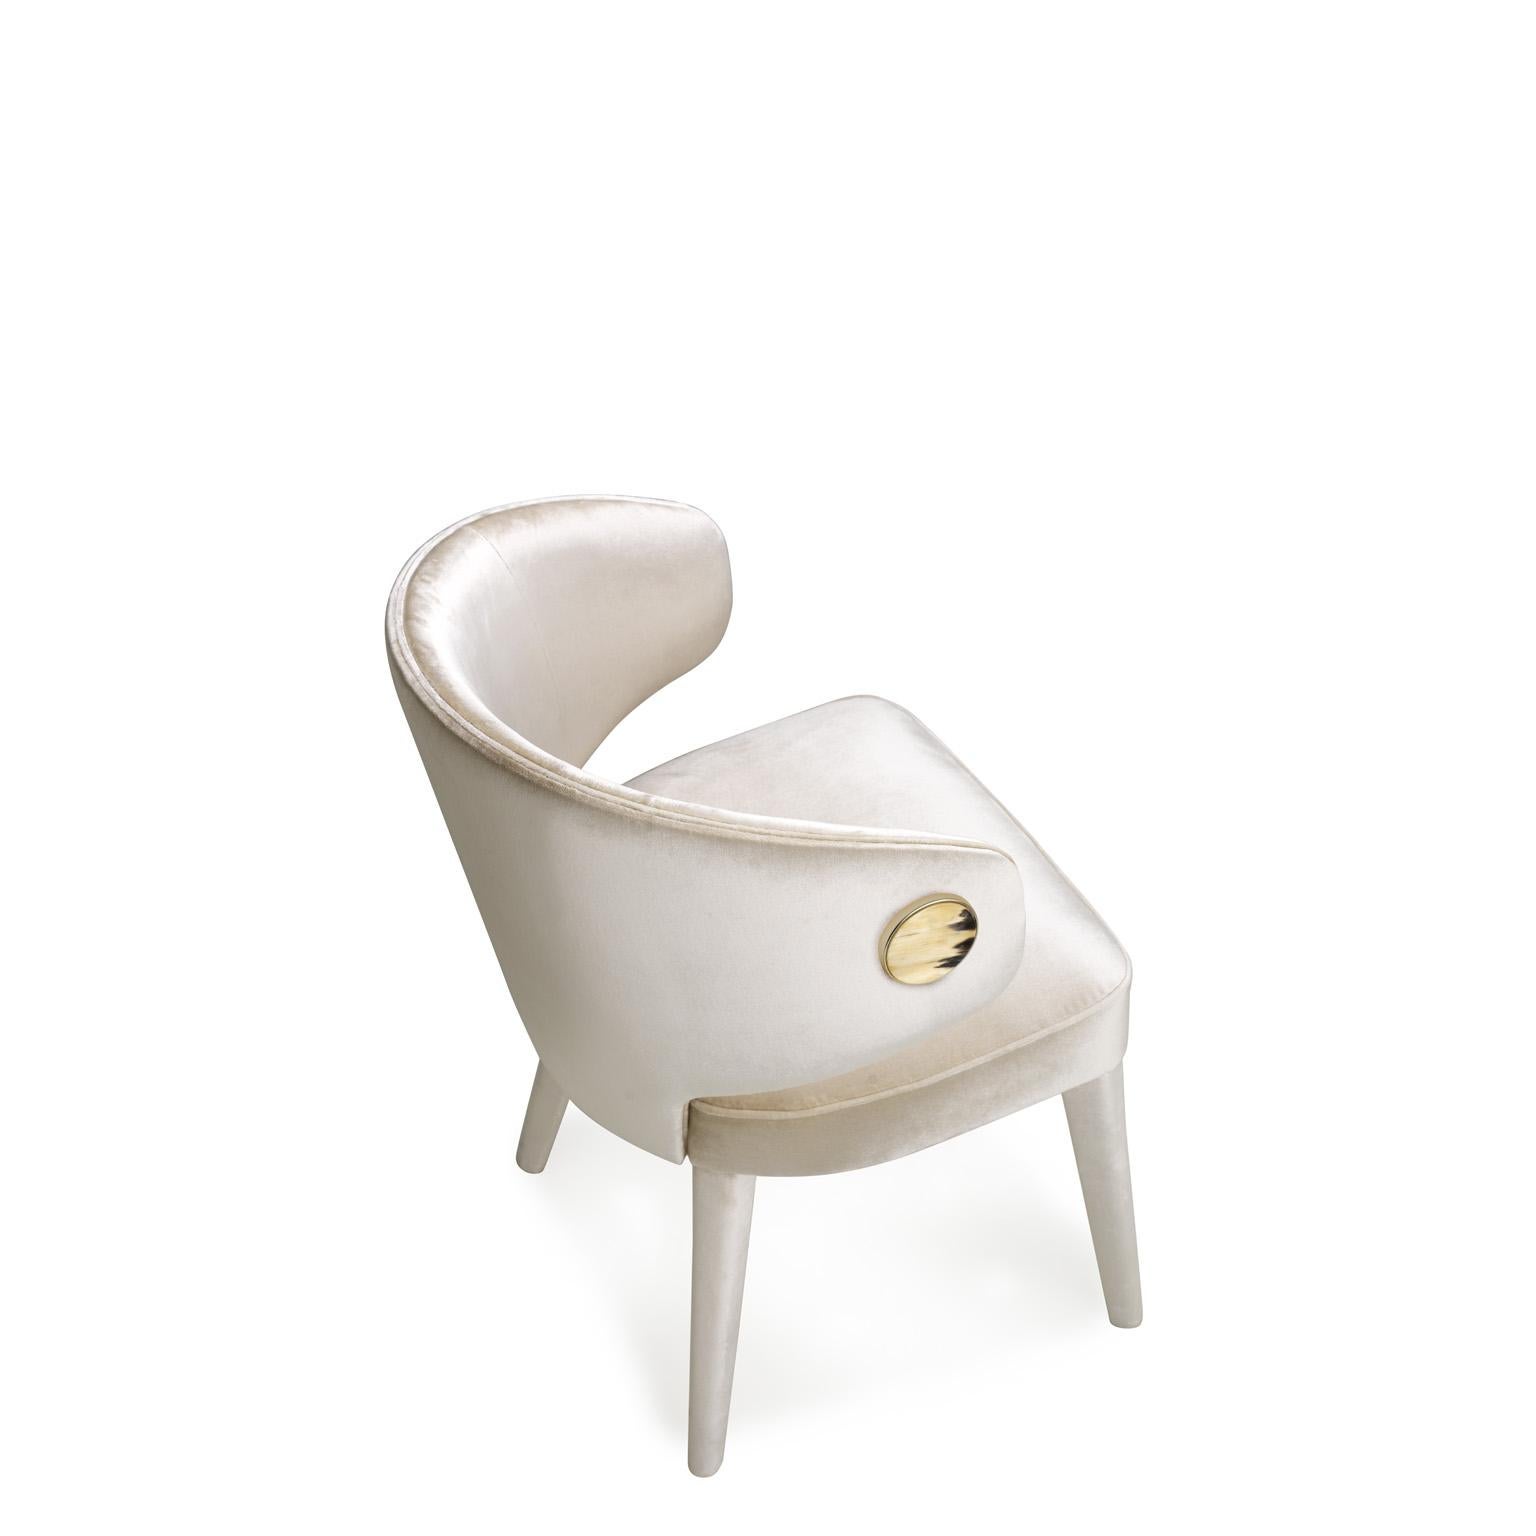 Expression of master craftsmanship values, our Circe chair is a unique blending of prized raw materials and considered details. Distinguished by soft volumes, Circe sports an enveloping backrest that welcomes and protects while offering the ultimate